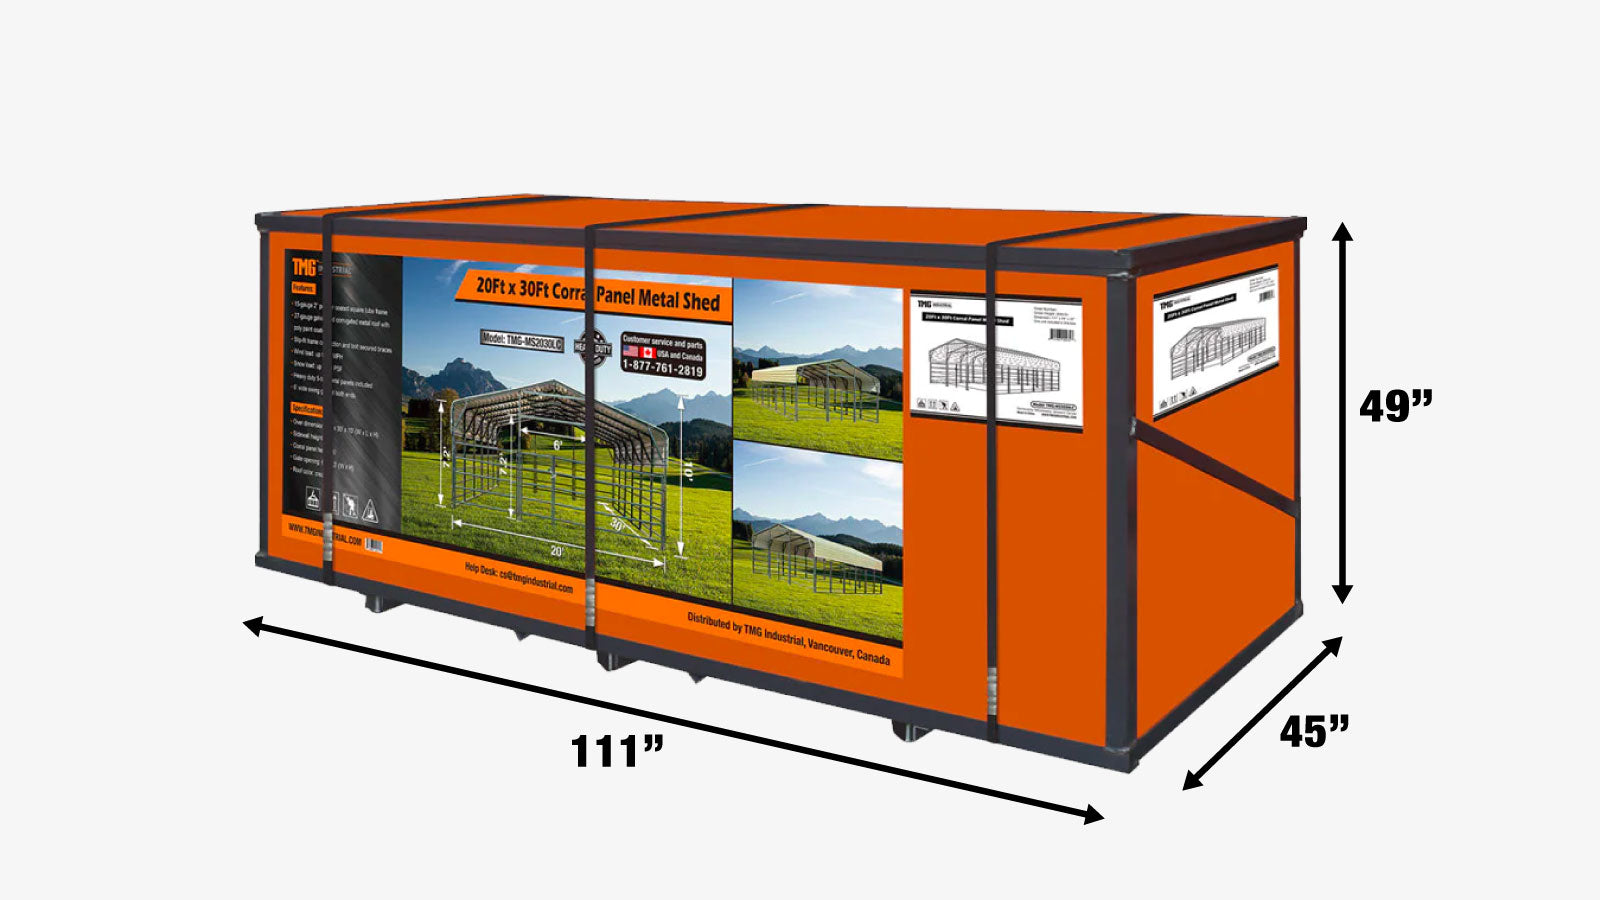 TMG Industrial 20' x 30' Bétail Corral Panel Metal Shed, 7' Sidewall Height, 5' Corral Panel Height, 600 Sq-Ft, 27 GA Corrugated Panels, TMG-MS2030LC-shipping-info-image